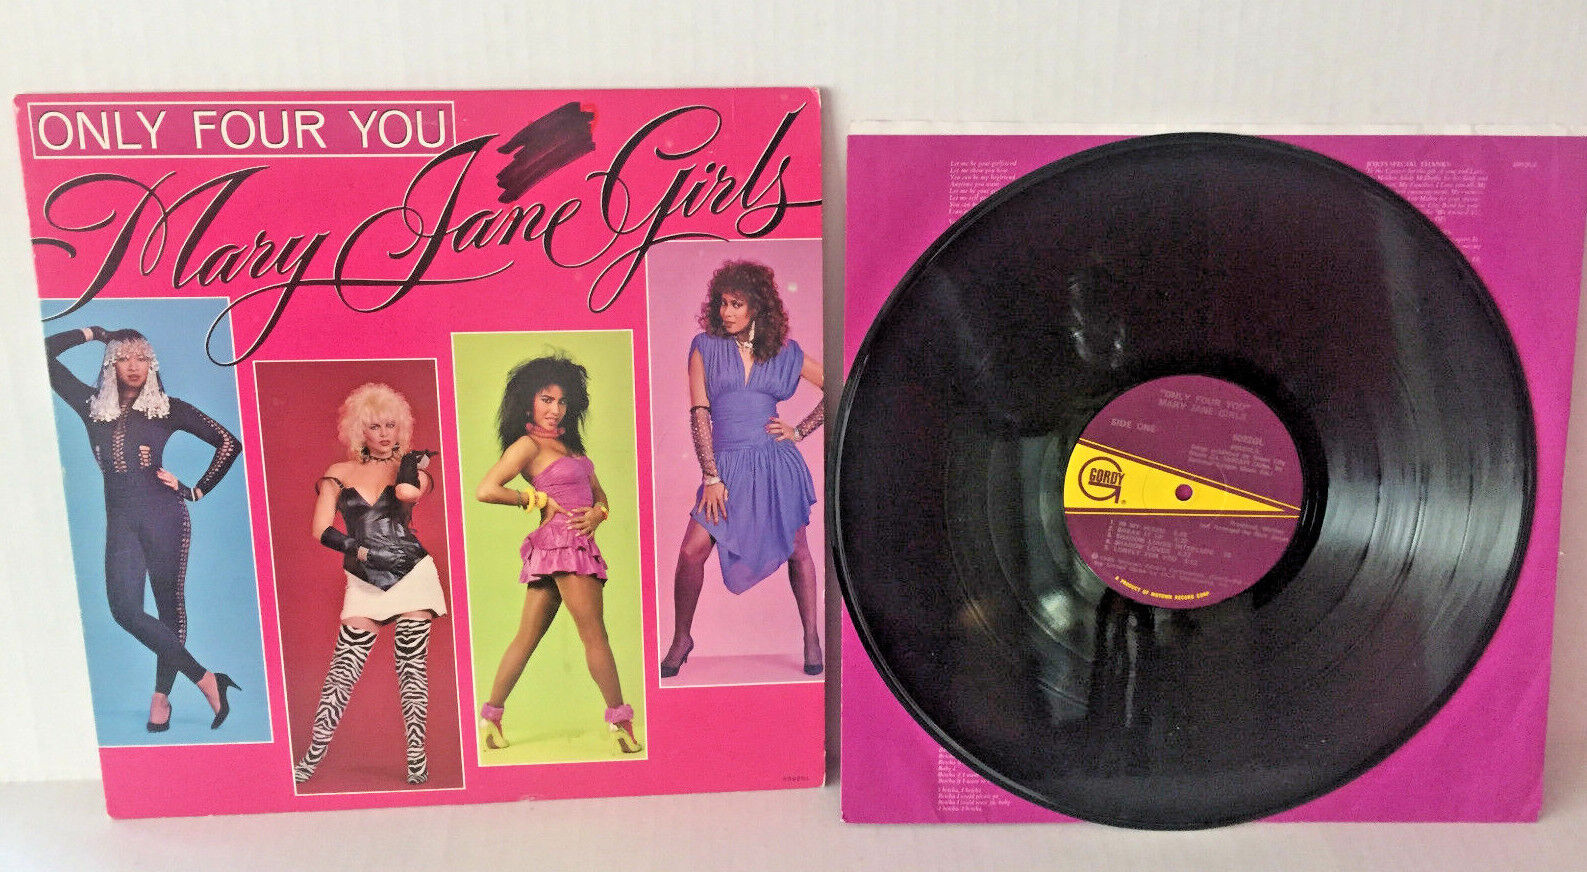 Vintage Mary Jane Girls LP - Only For You - 1985 - Produced By Rick James